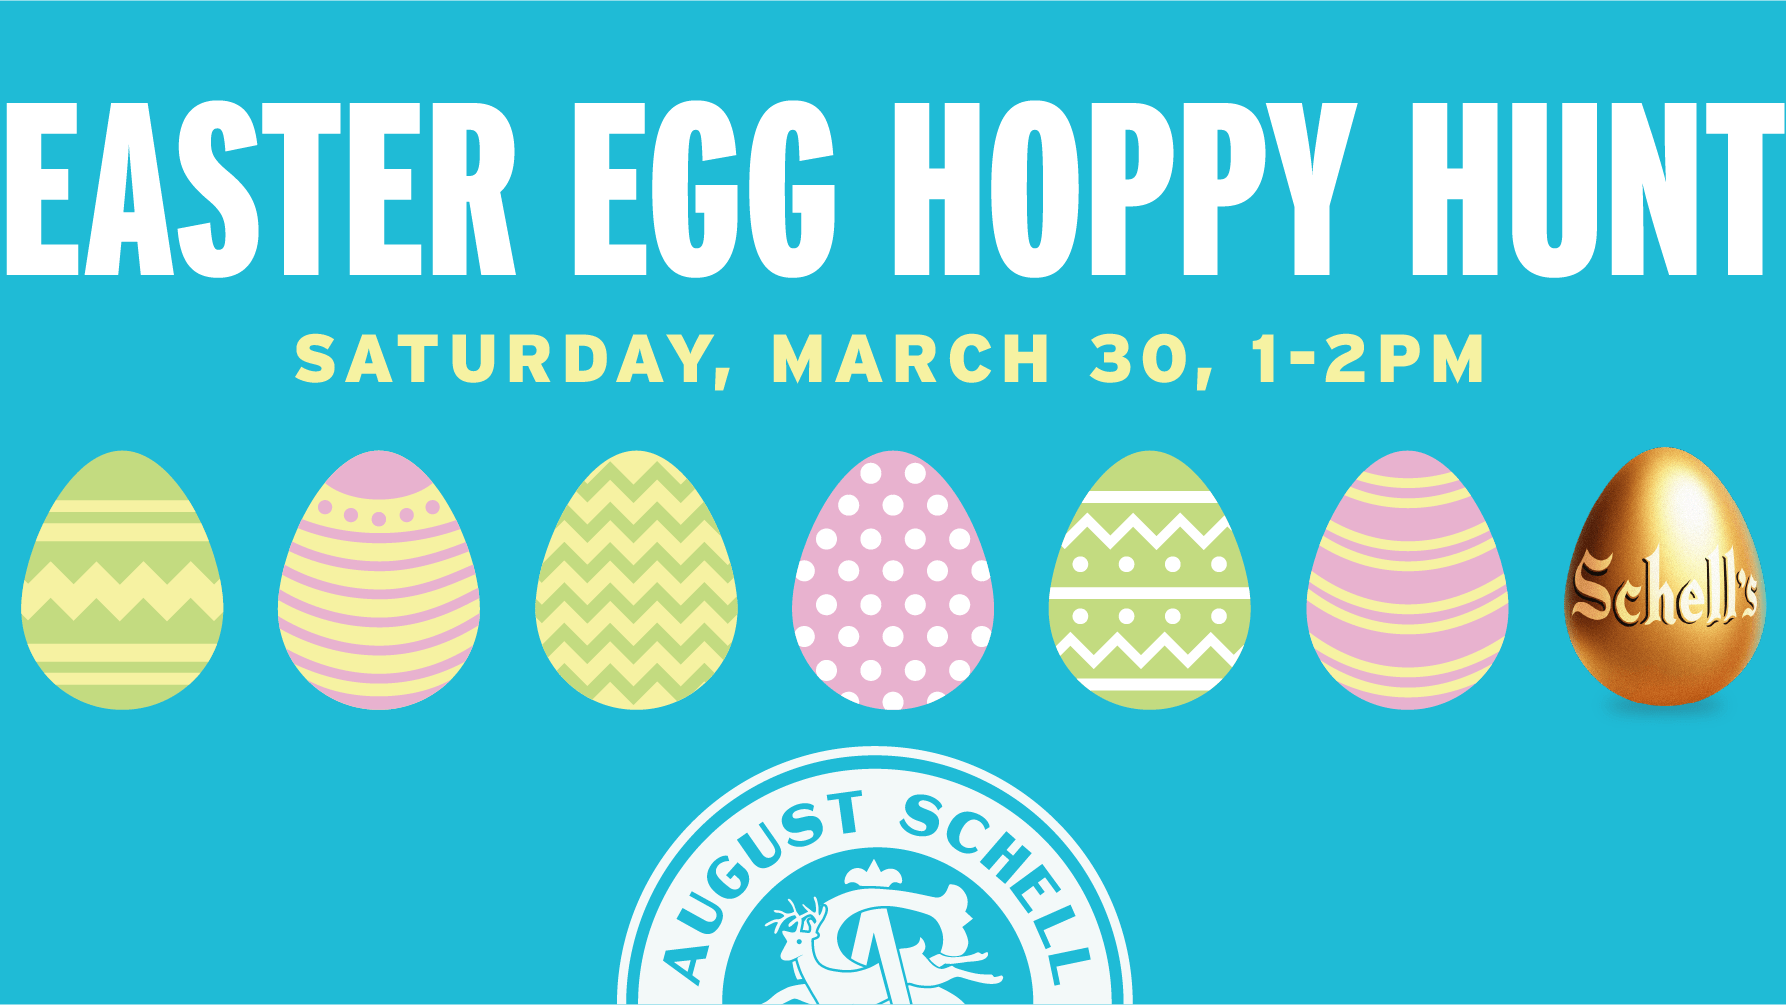 "EASTER EGG HOPPY HUNT" "SATURDAY, MARCH 30, 1-2PM" Six colored Easter eggs and a golden egg on the right with "Schell's" on the egg. August Schell Brewing Company half-circle logo with a deer and "AS" letters in the center.